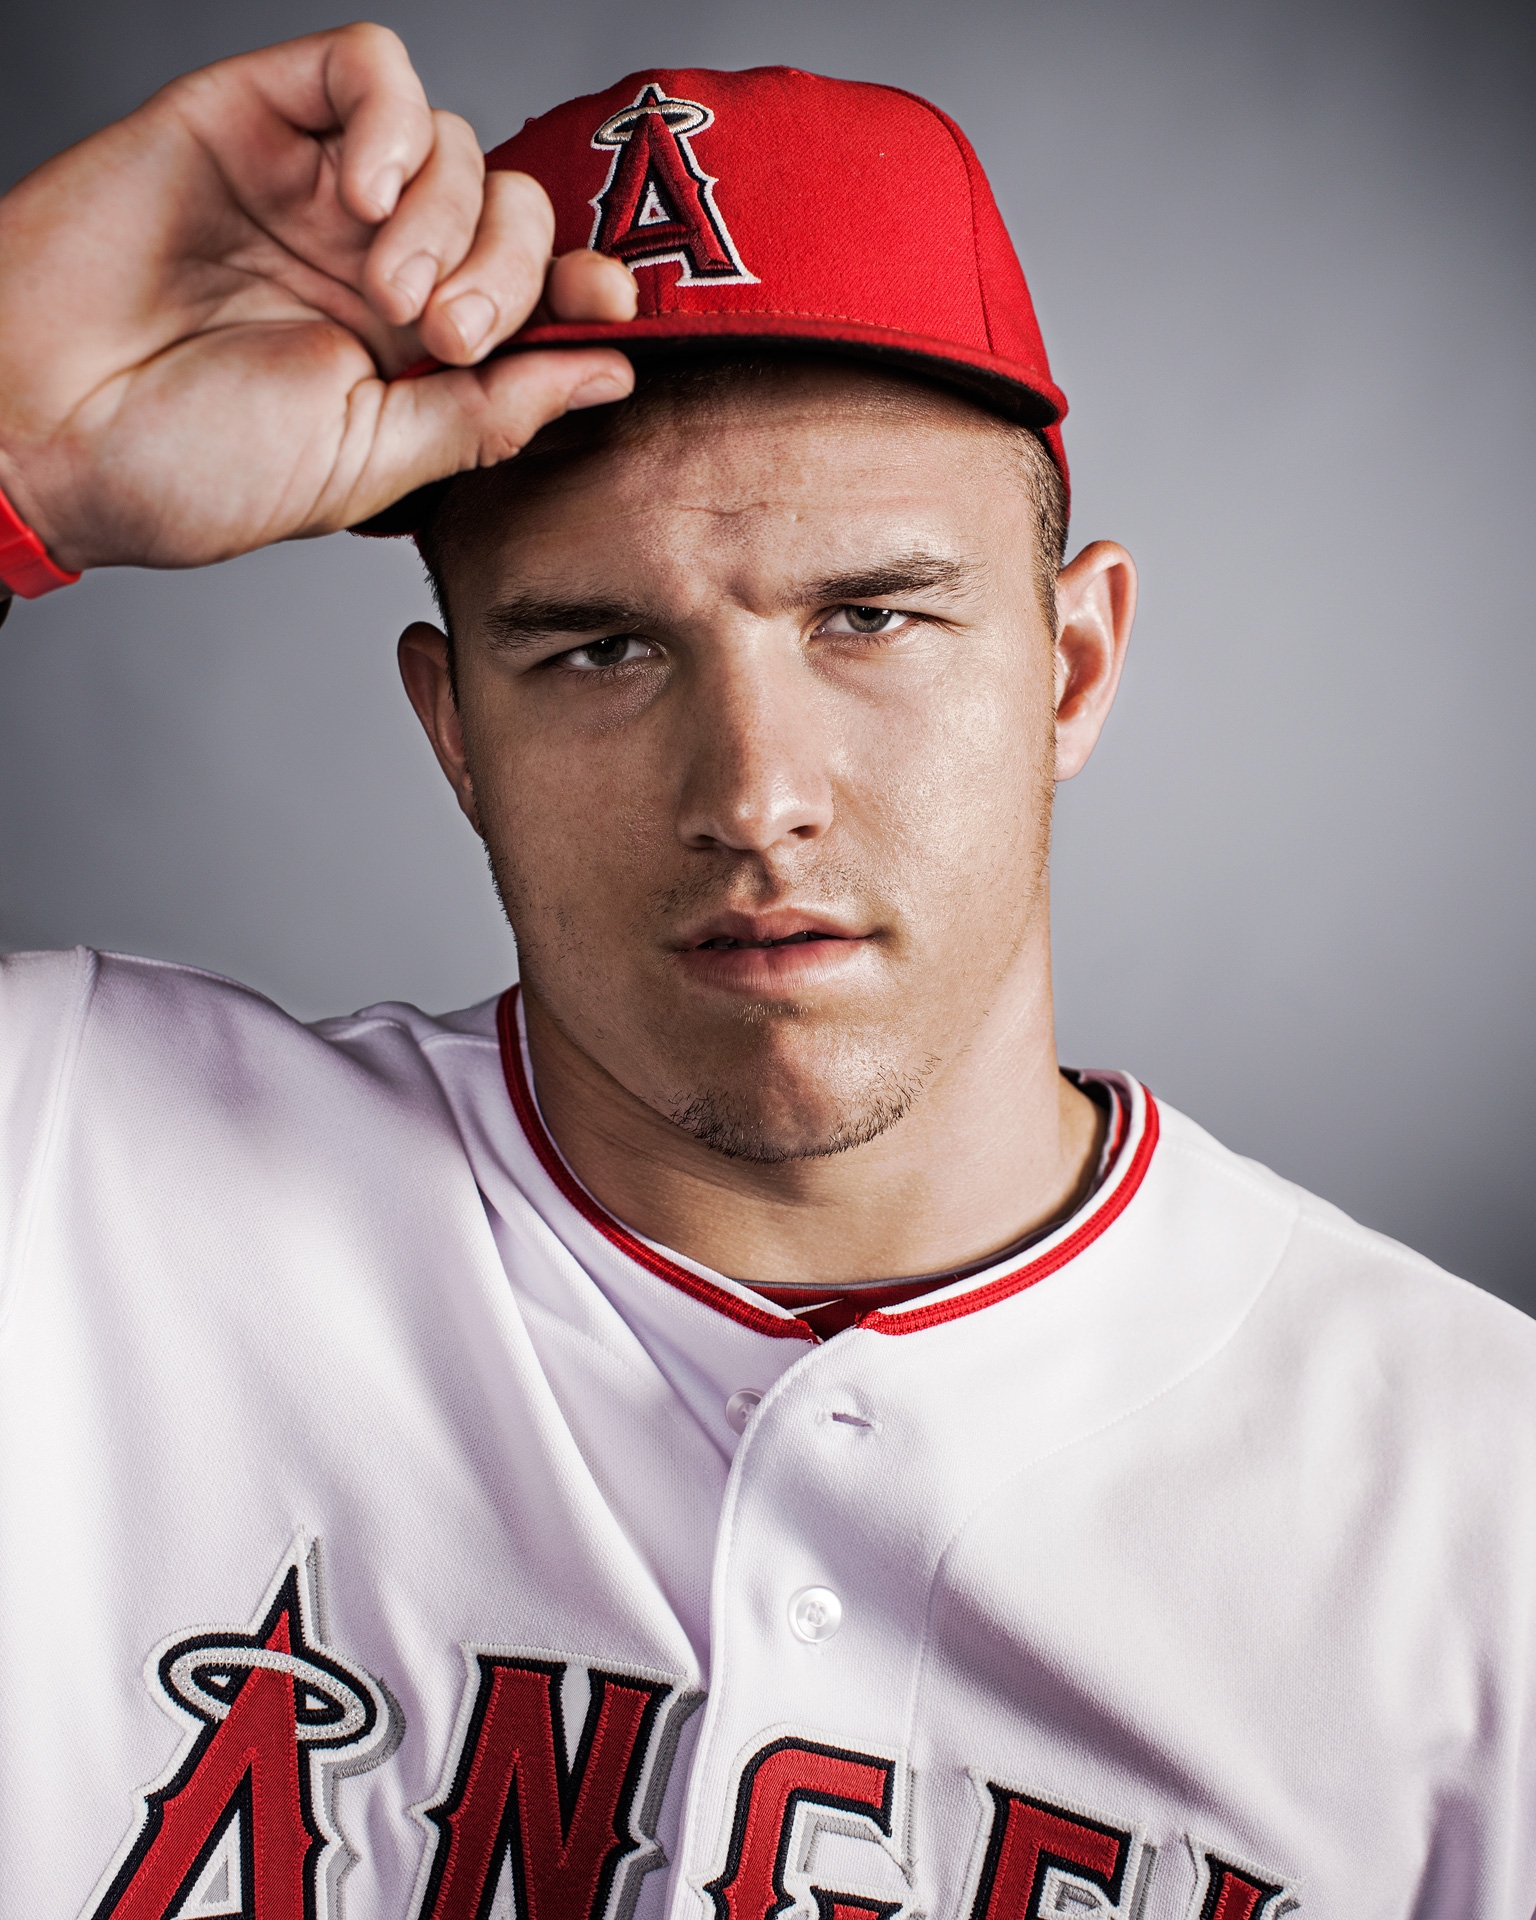 Behind the Scenes: Mike Trout Cover Shoot - ESPN